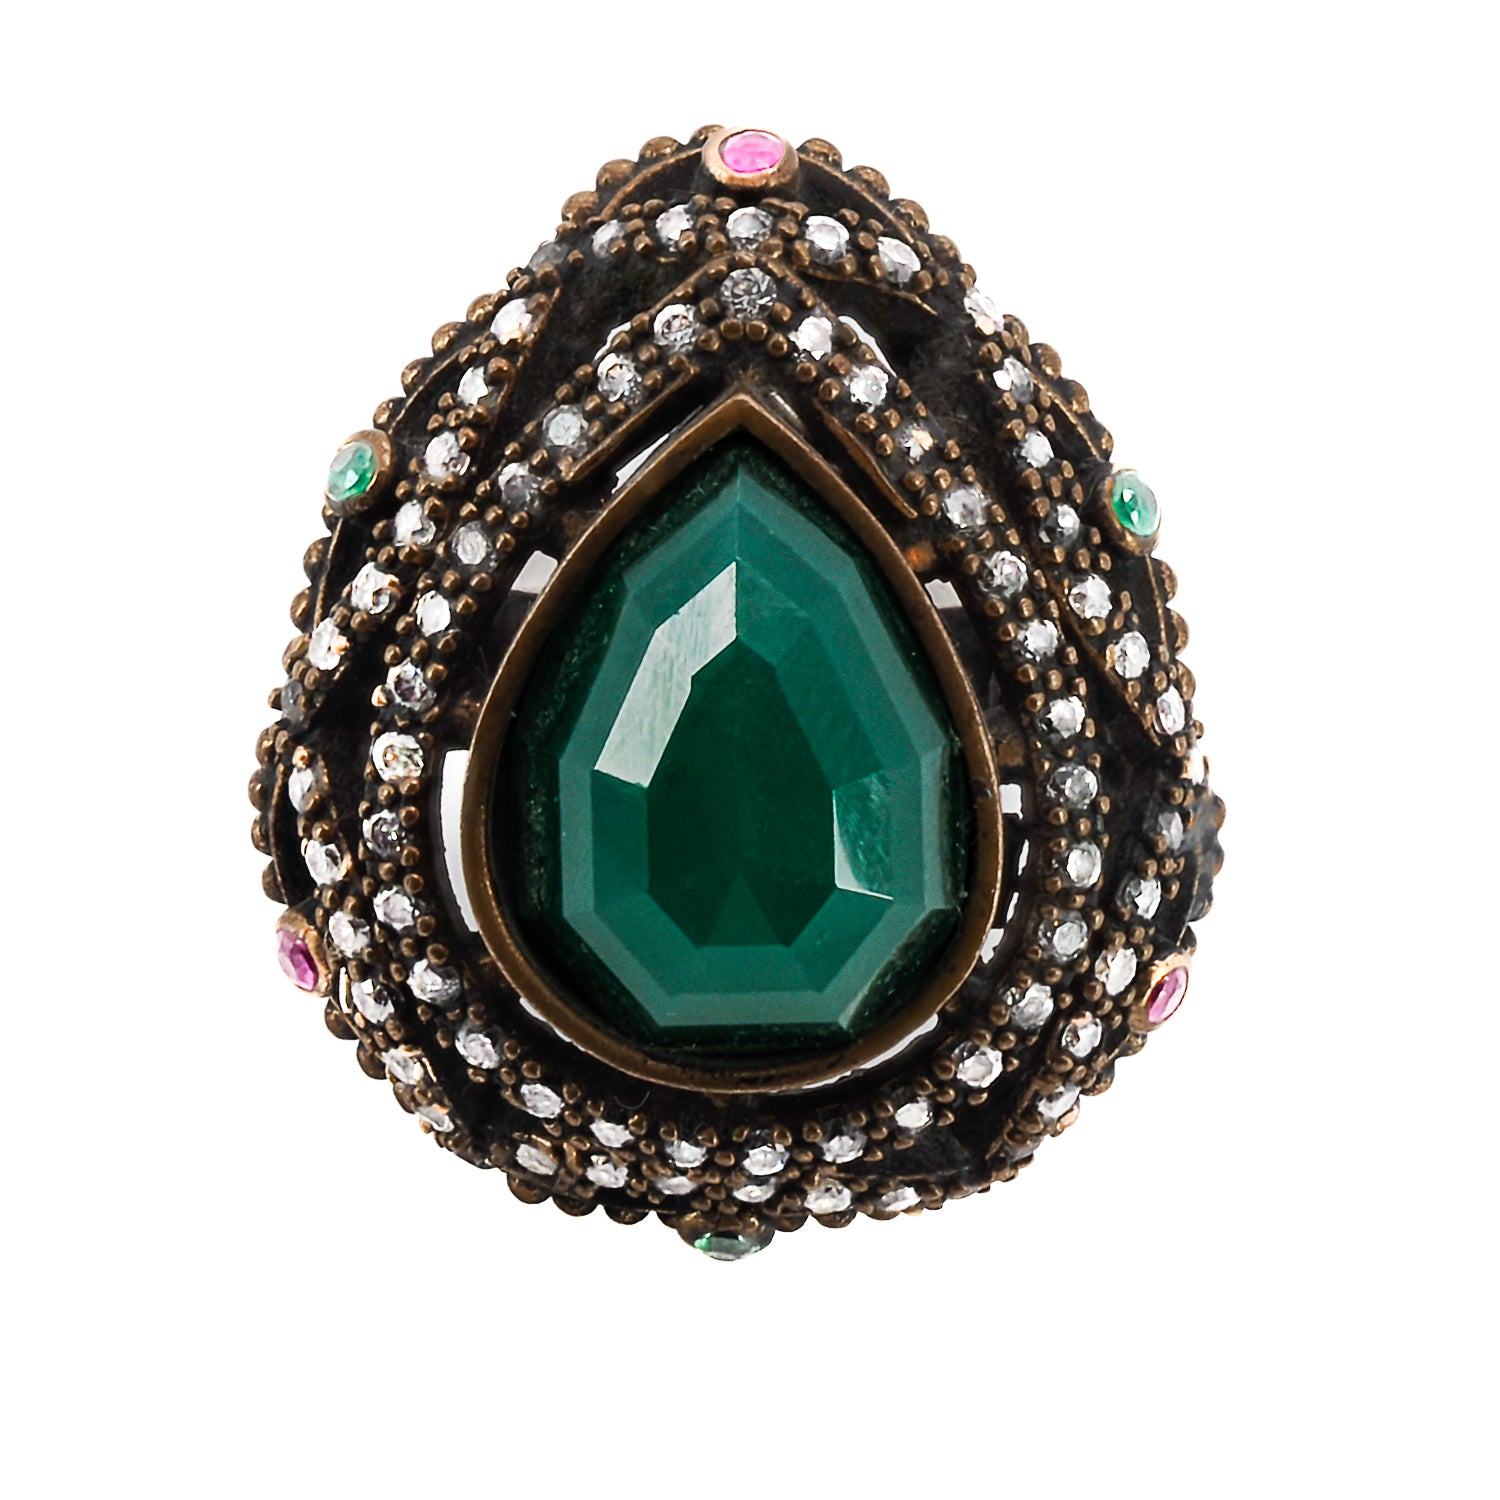 Handmade Elegance - Crafted with antique silver and stunning gemstones.